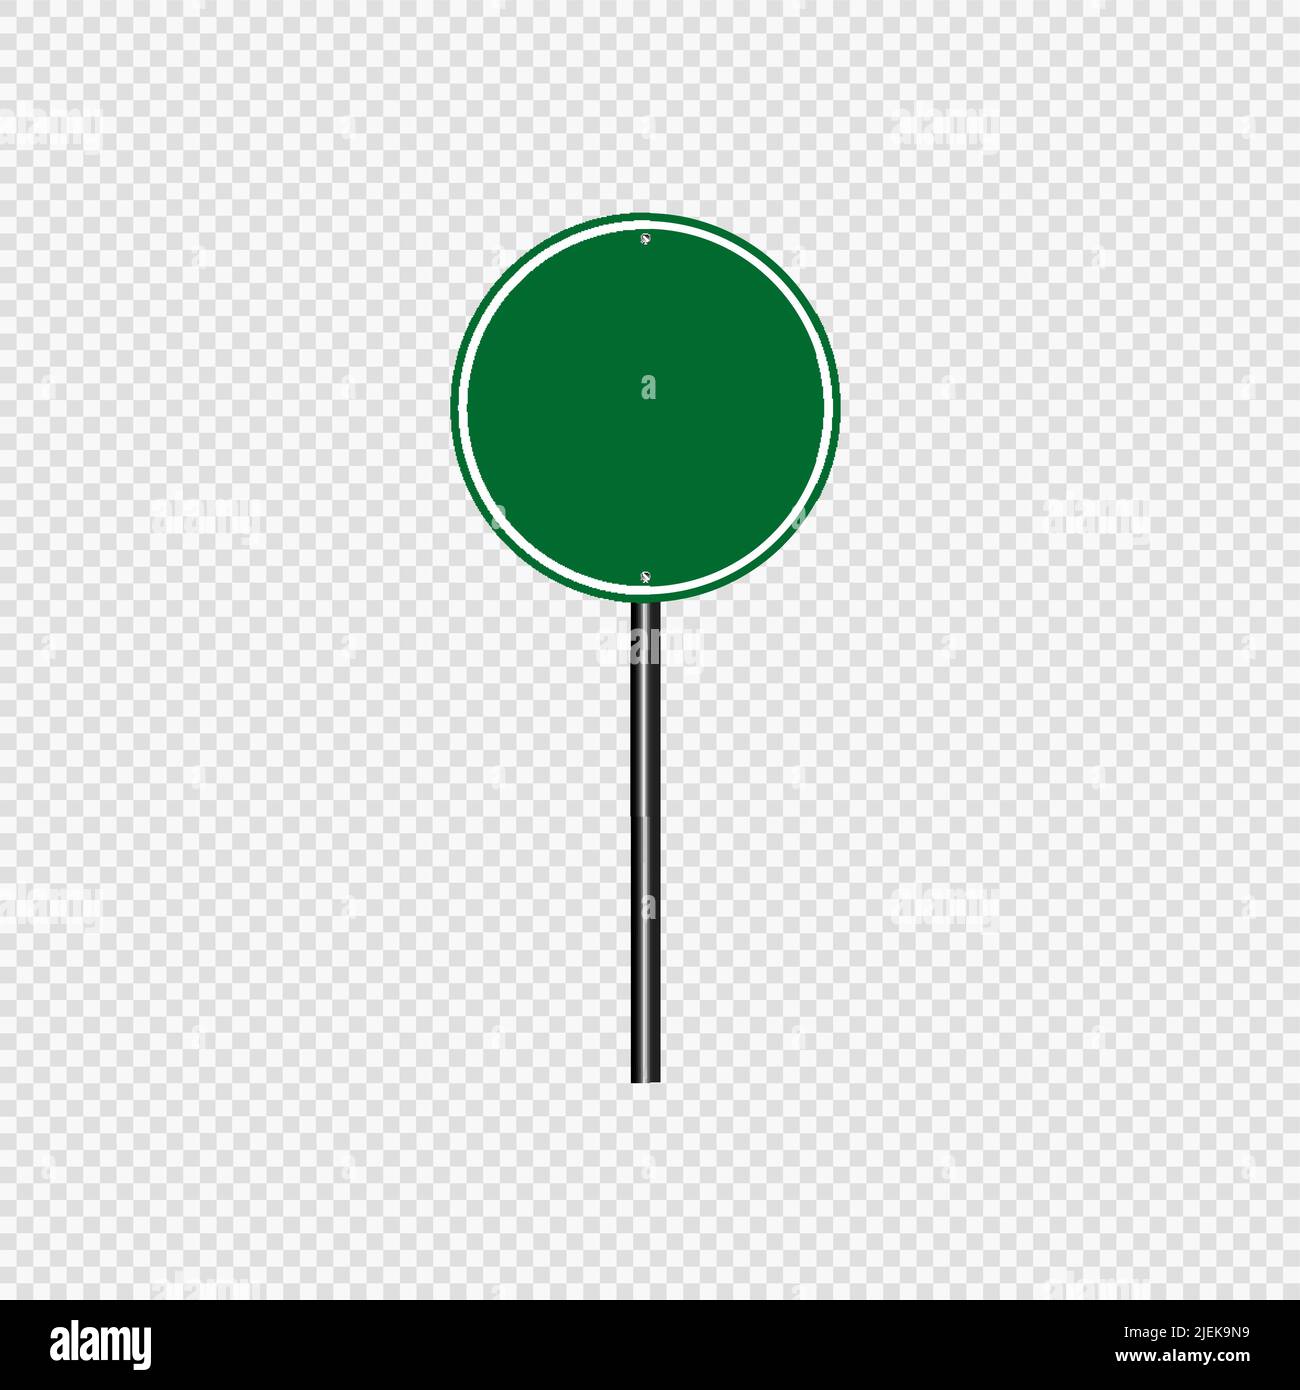 Green traffic sign,Road board signs isolated on transparent background Stock Vector